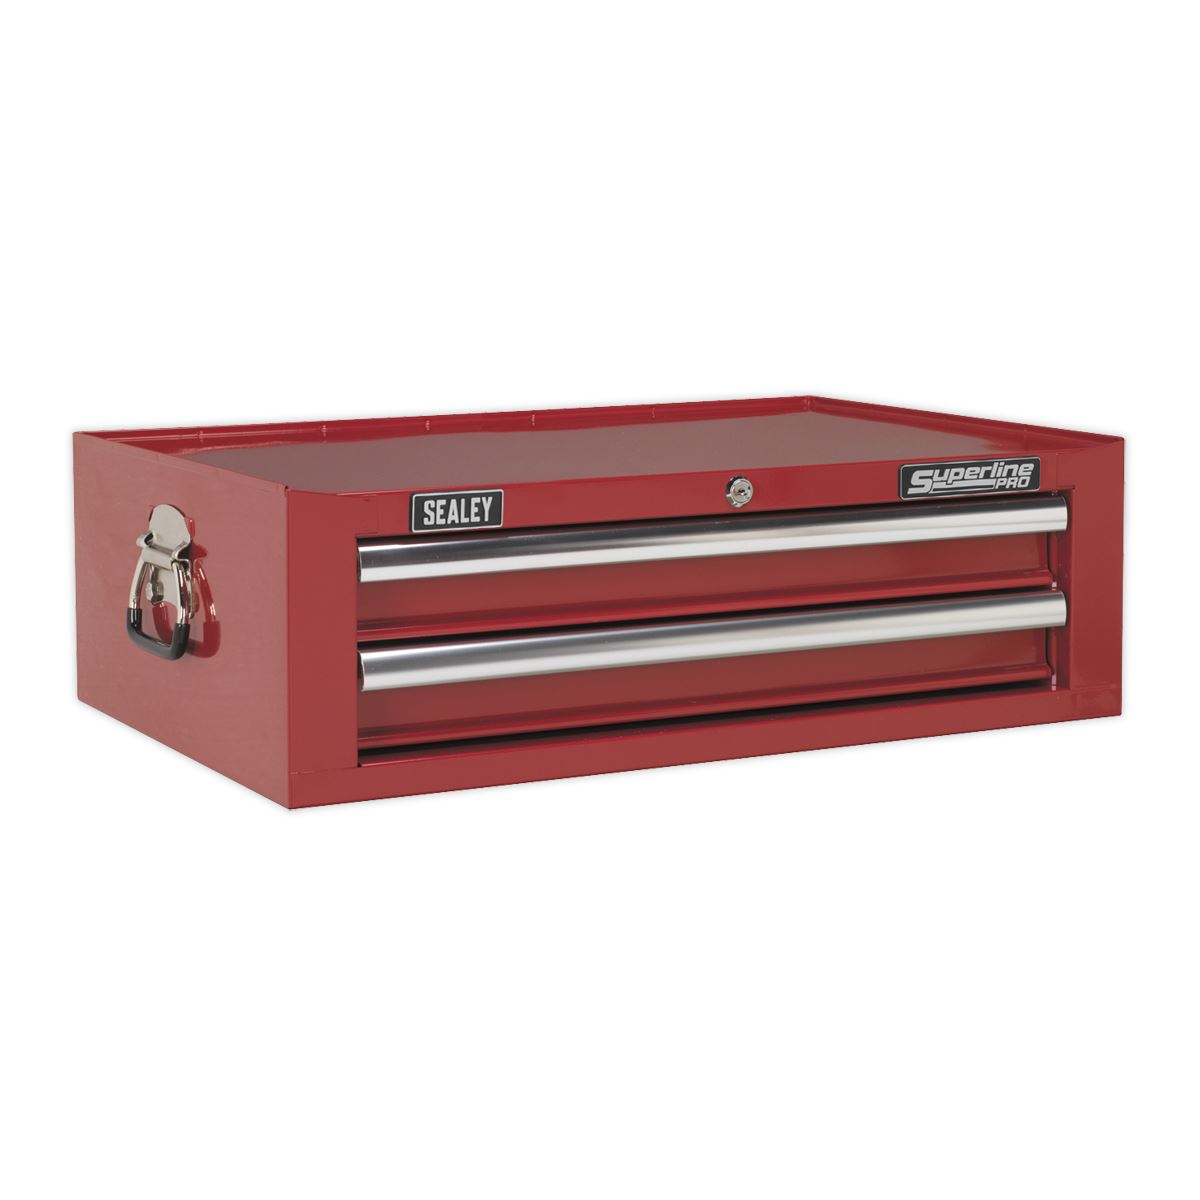 Sealey Superline Pro Mid-Box 2 Drawer with Ball-Bearing Slides - Red